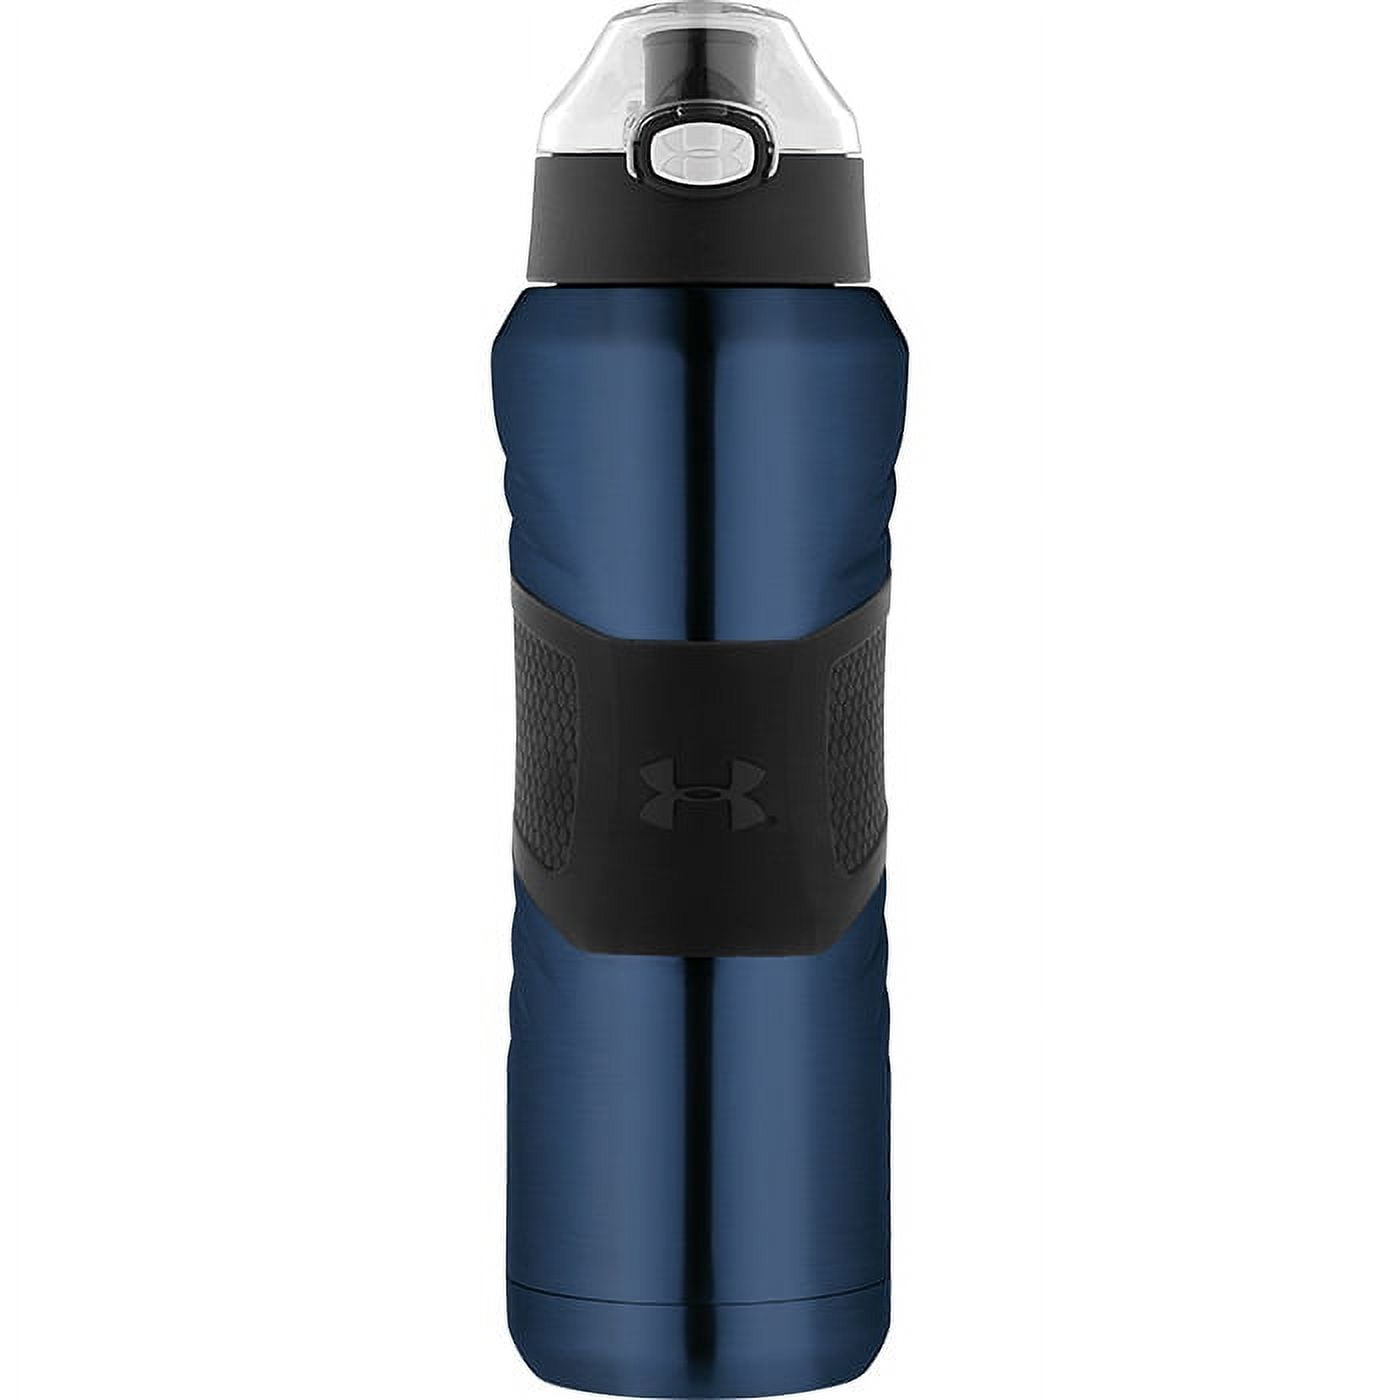 Under Armour's Thermos-made 24-Oz. water bottle is 25% off, now